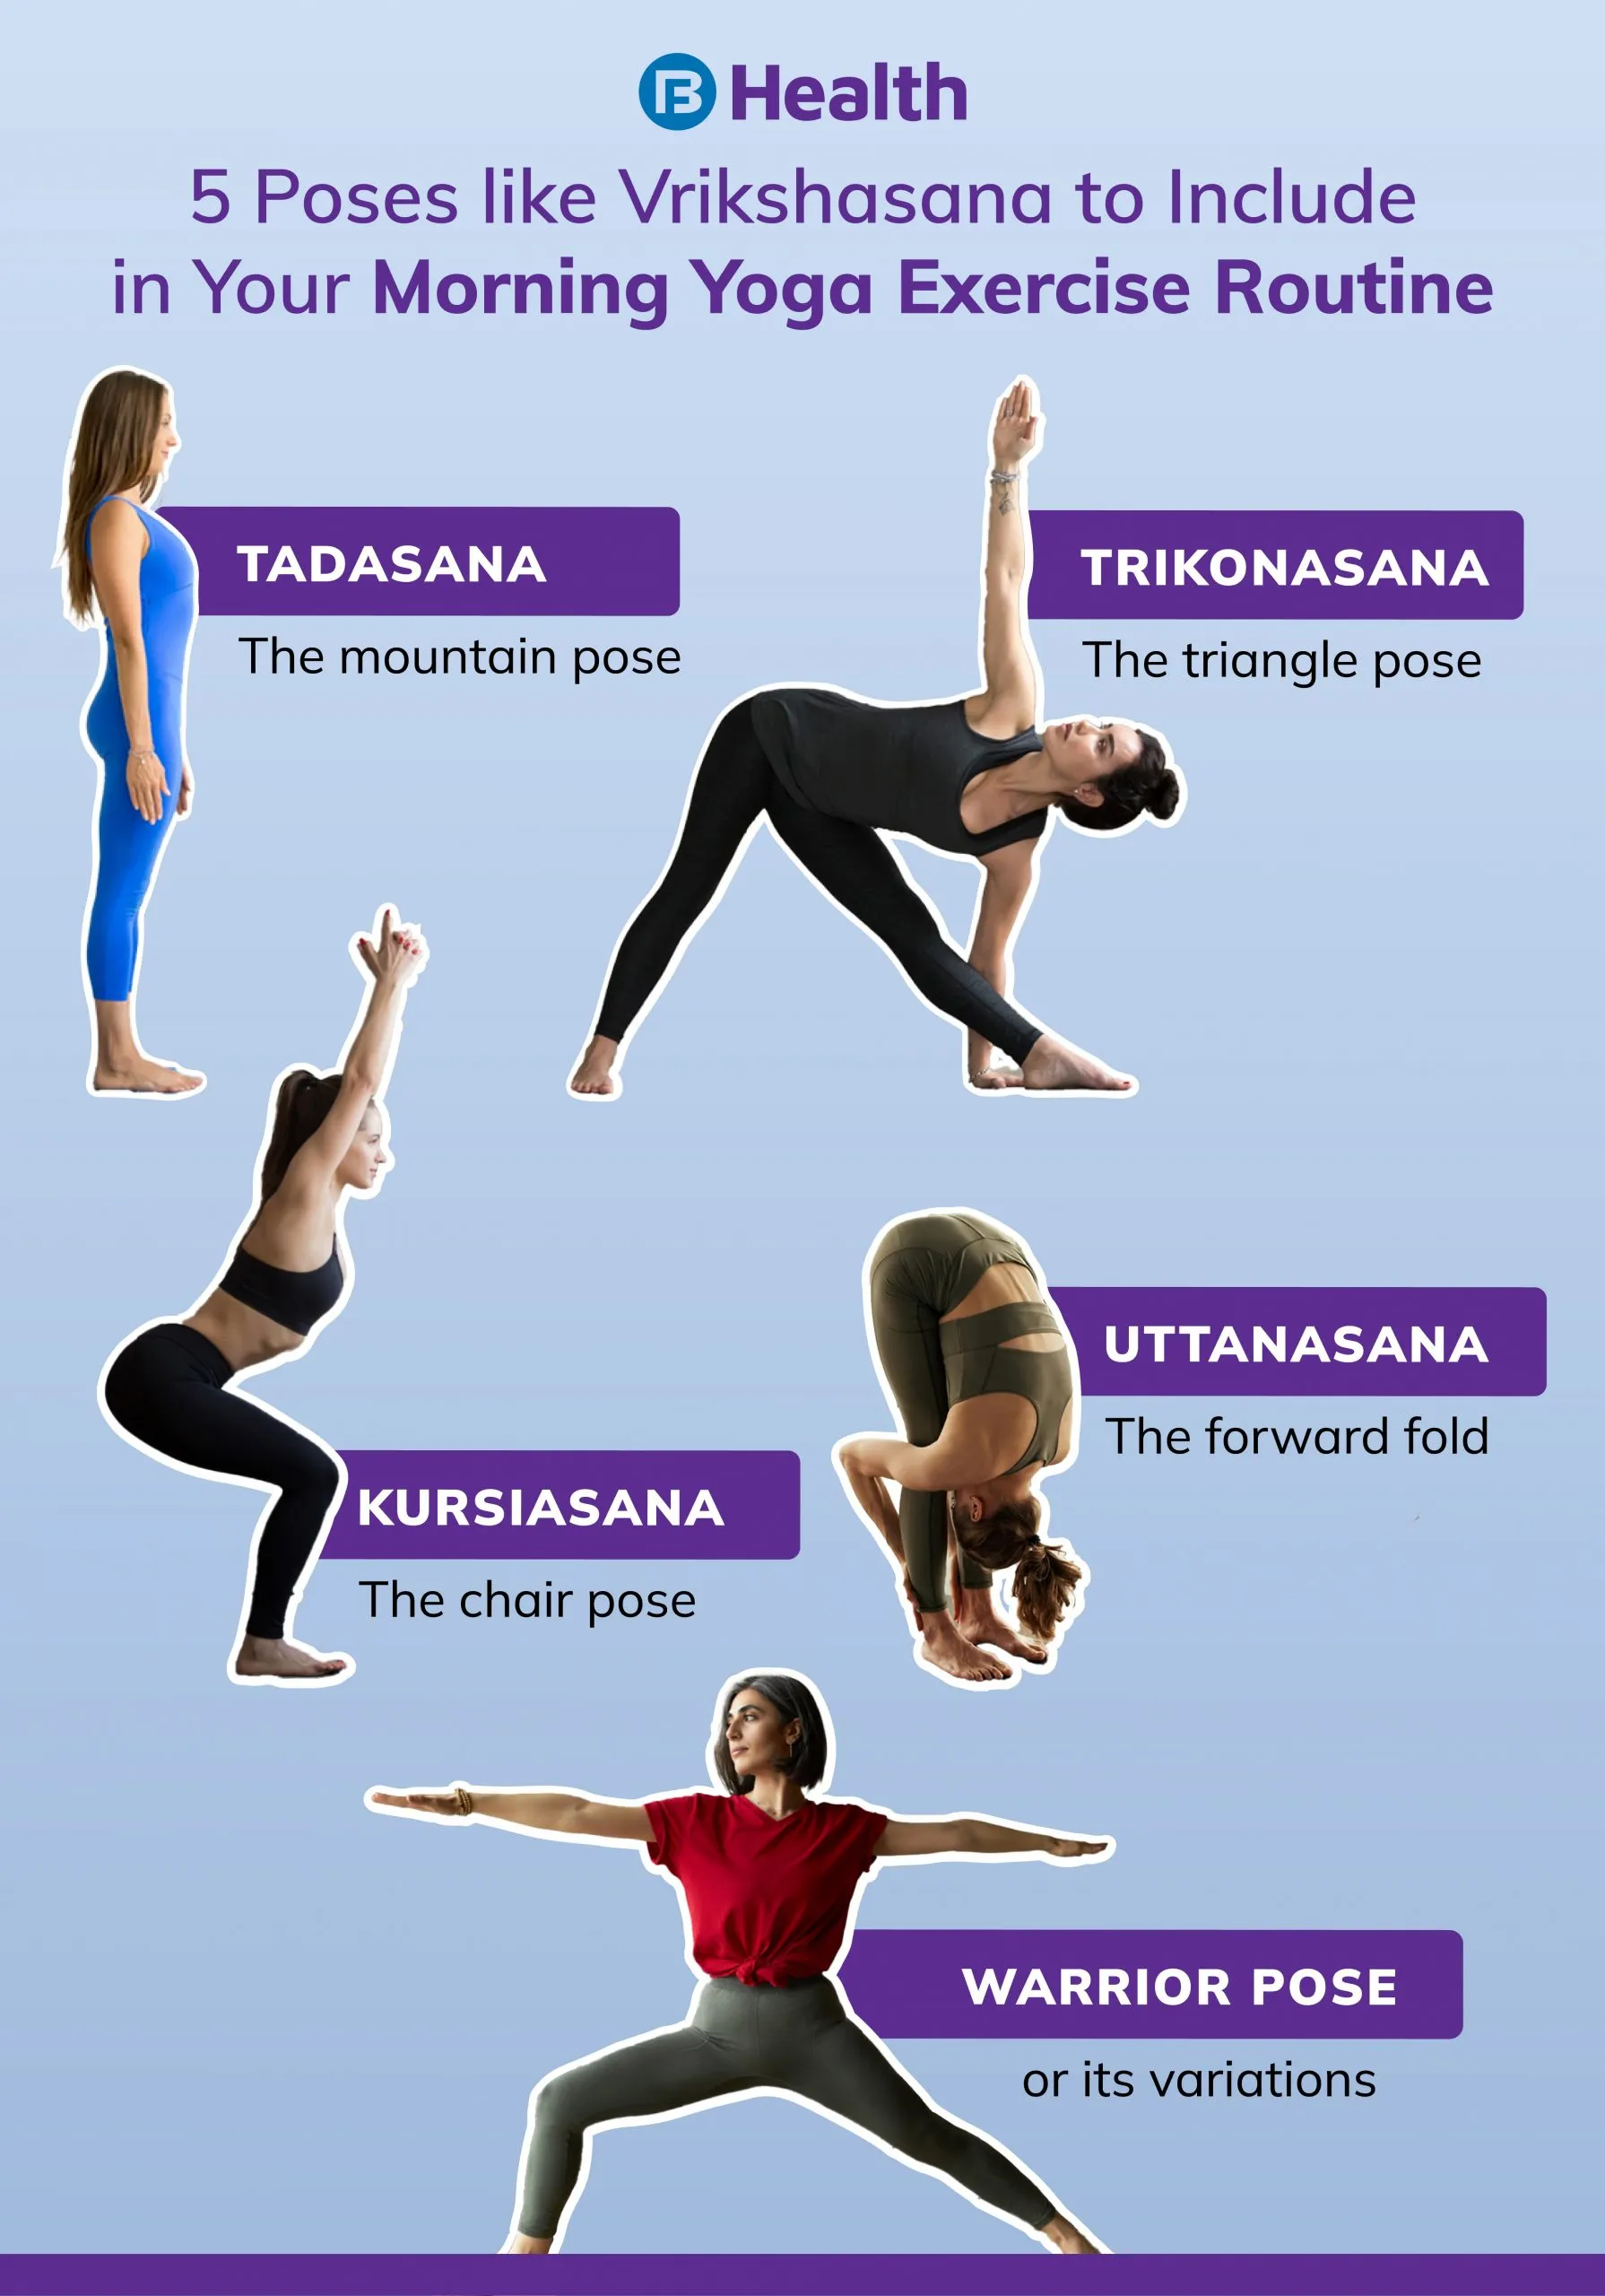 How to do Surya Namaskar : Steps and Benefits (with Pictures) | Indian Youth